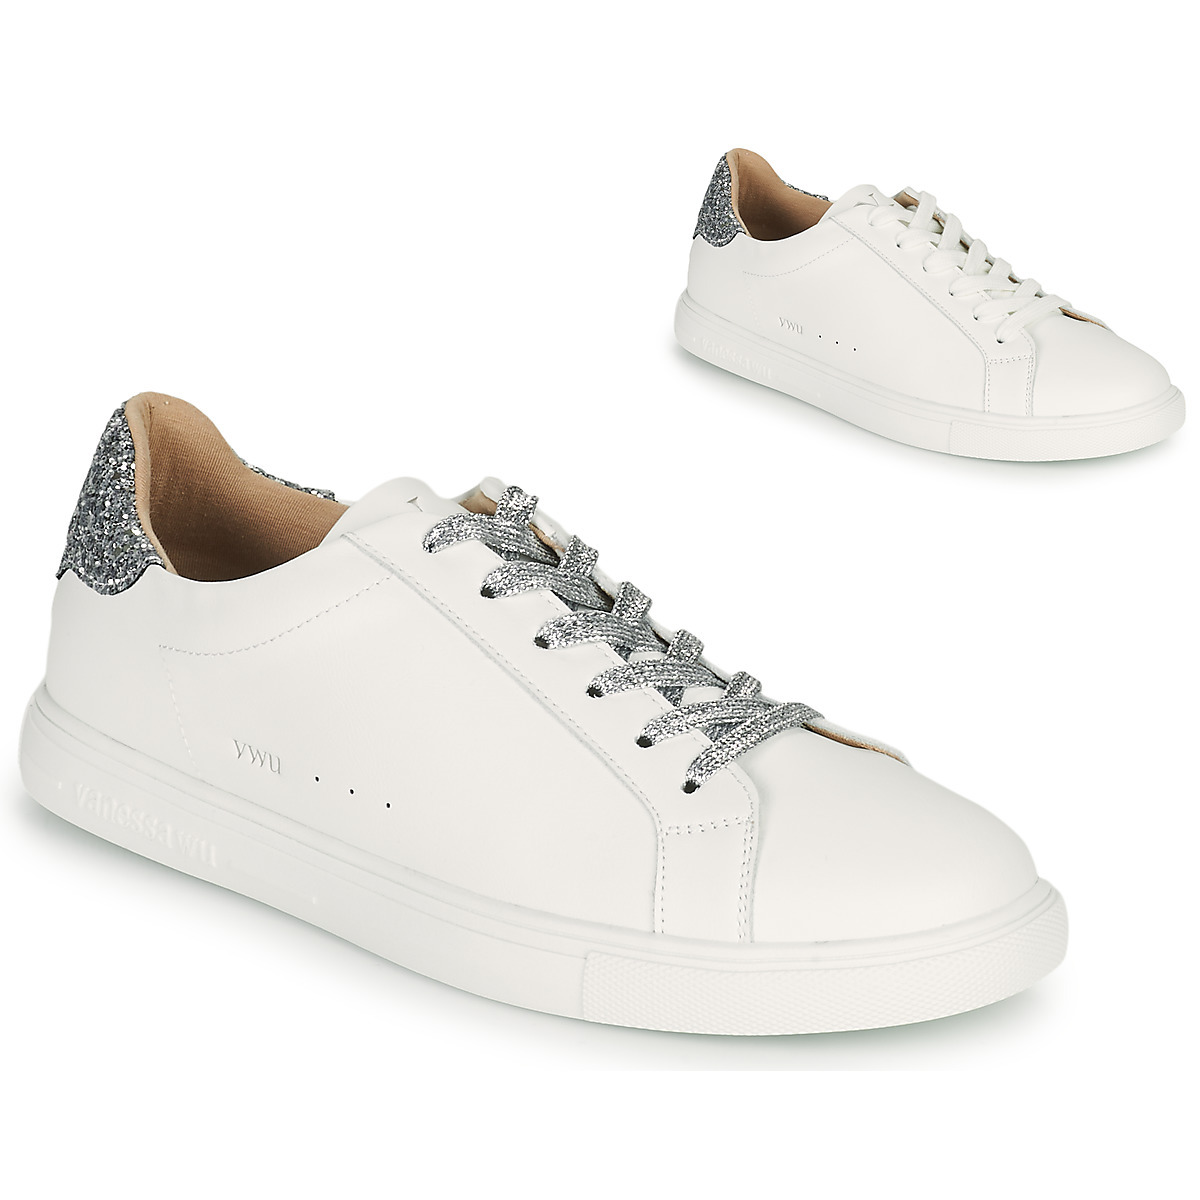 Spartoo - Lady Sneakers in White from Vanessa Wu GOOFASH